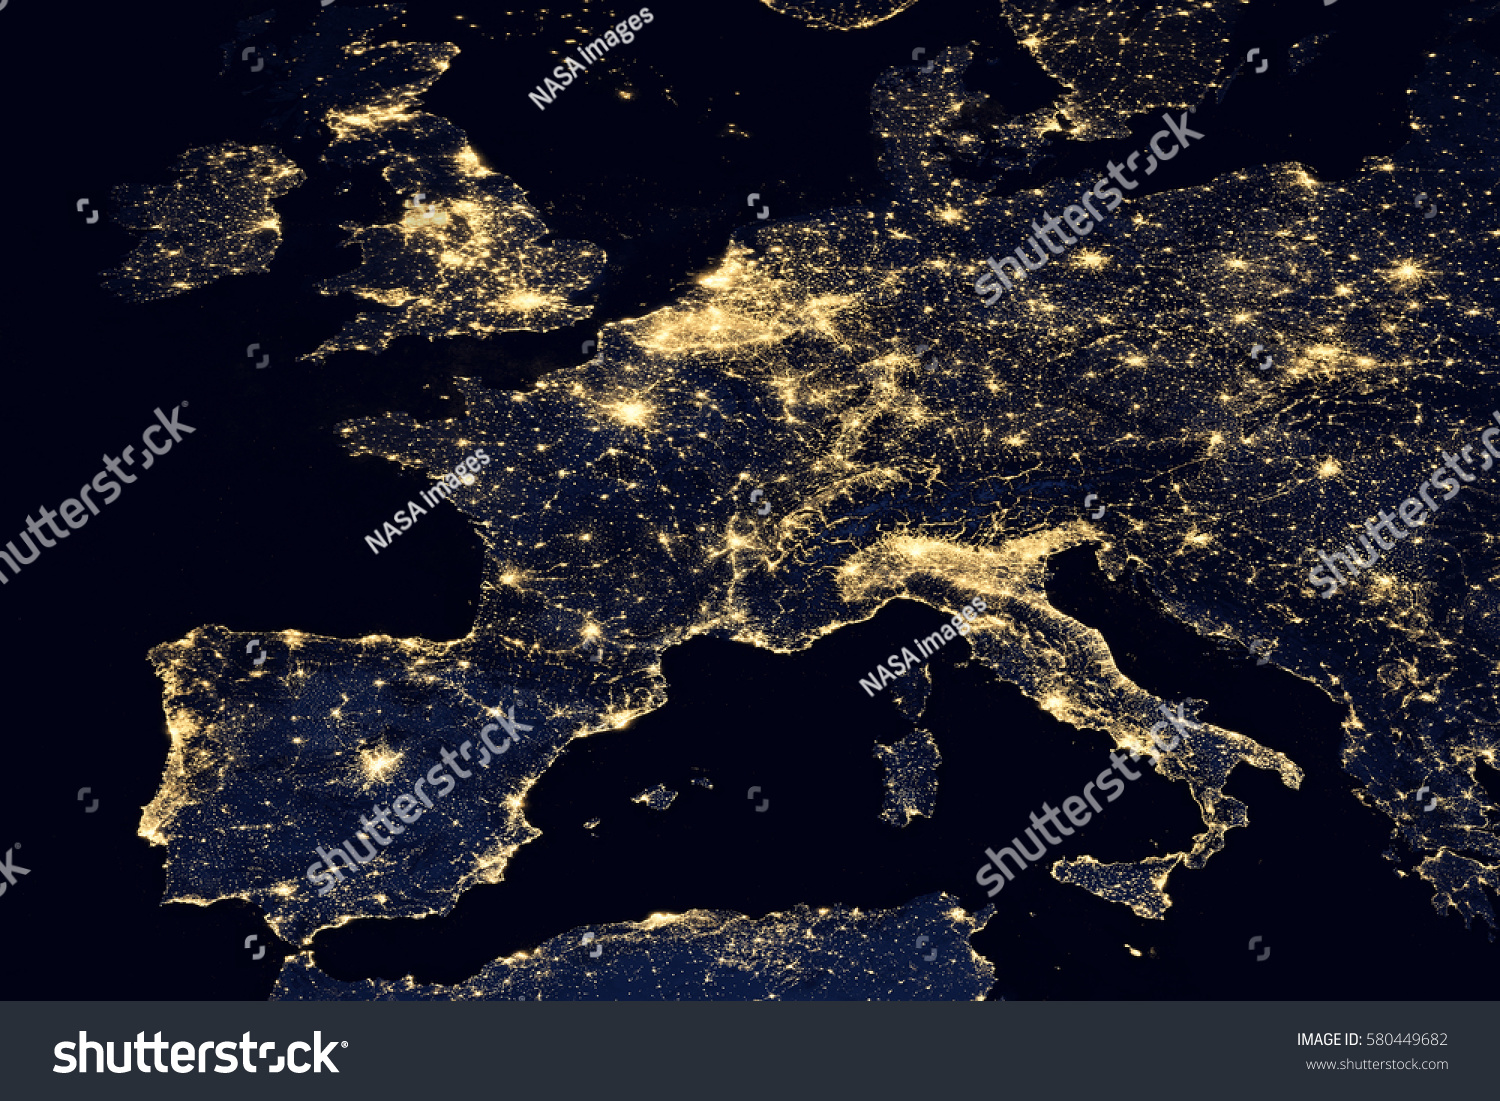 City lights on world map. Europe. Elements of this image are furnished by NASA #580449682